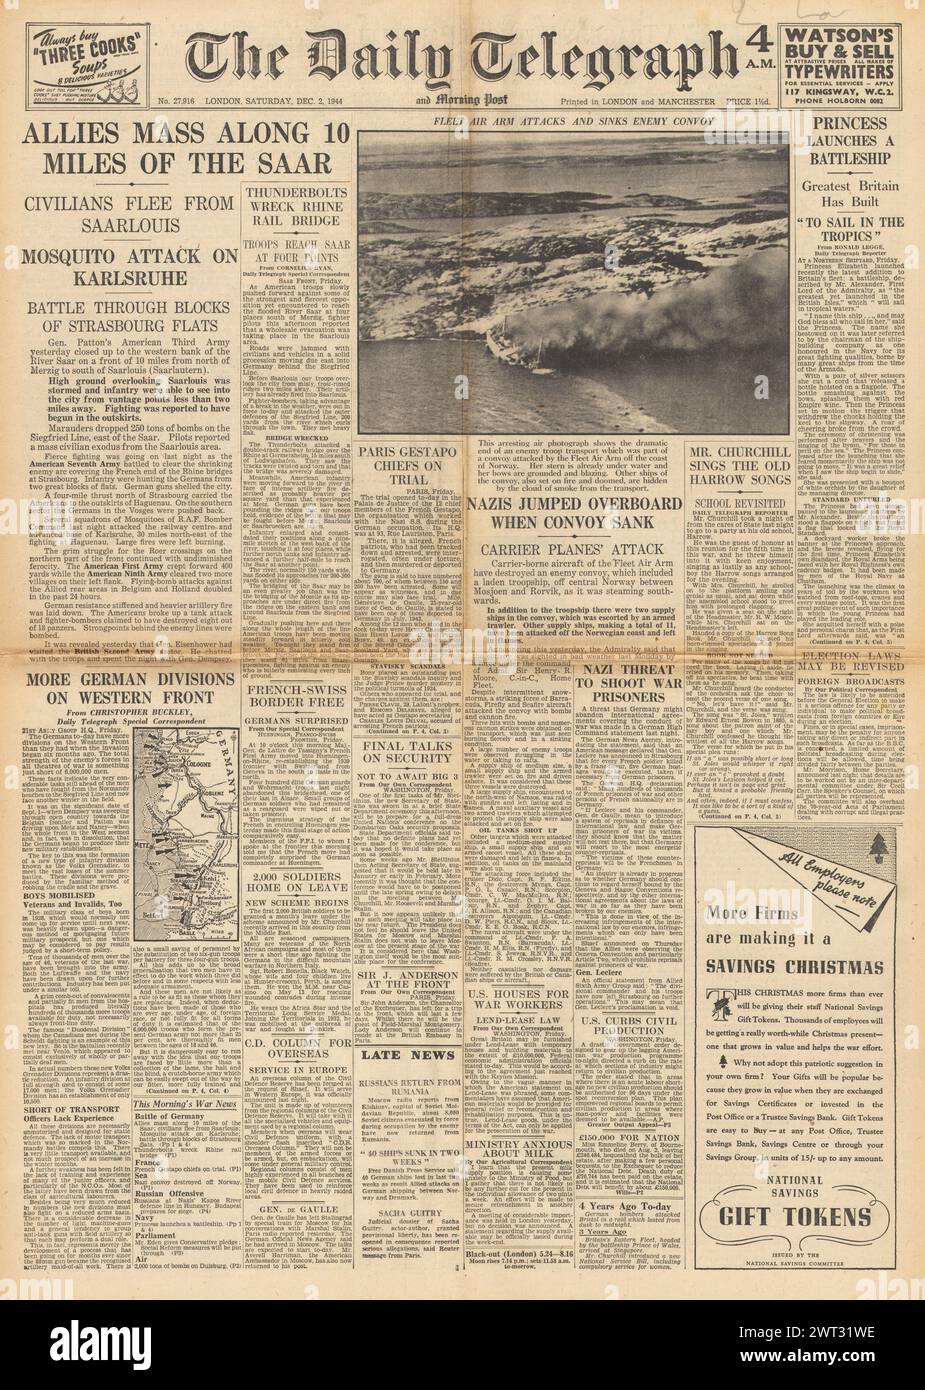 1944 The Daily Telegraph front page reporting Allies mass along the Saar, Fleet Air Arm attack enemy convoy, RAF bomb Karlsruhe and Princess Elizabeth launches HMS Vanguard Stock Photo